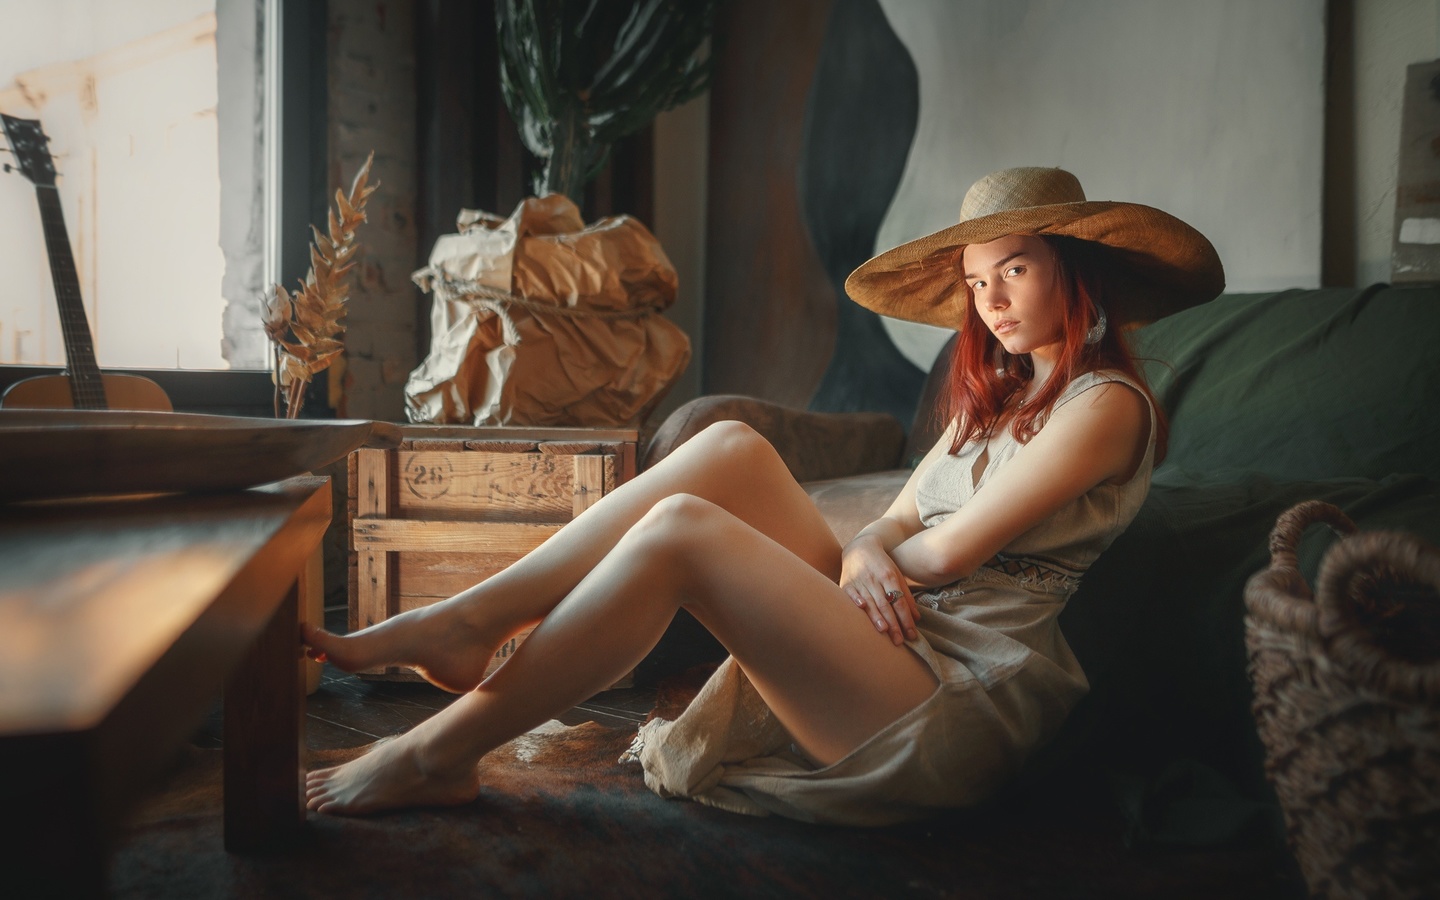 women, model, redhead, women indoors, dress, sitting, hat, table, window, couch, barefoot, guitar